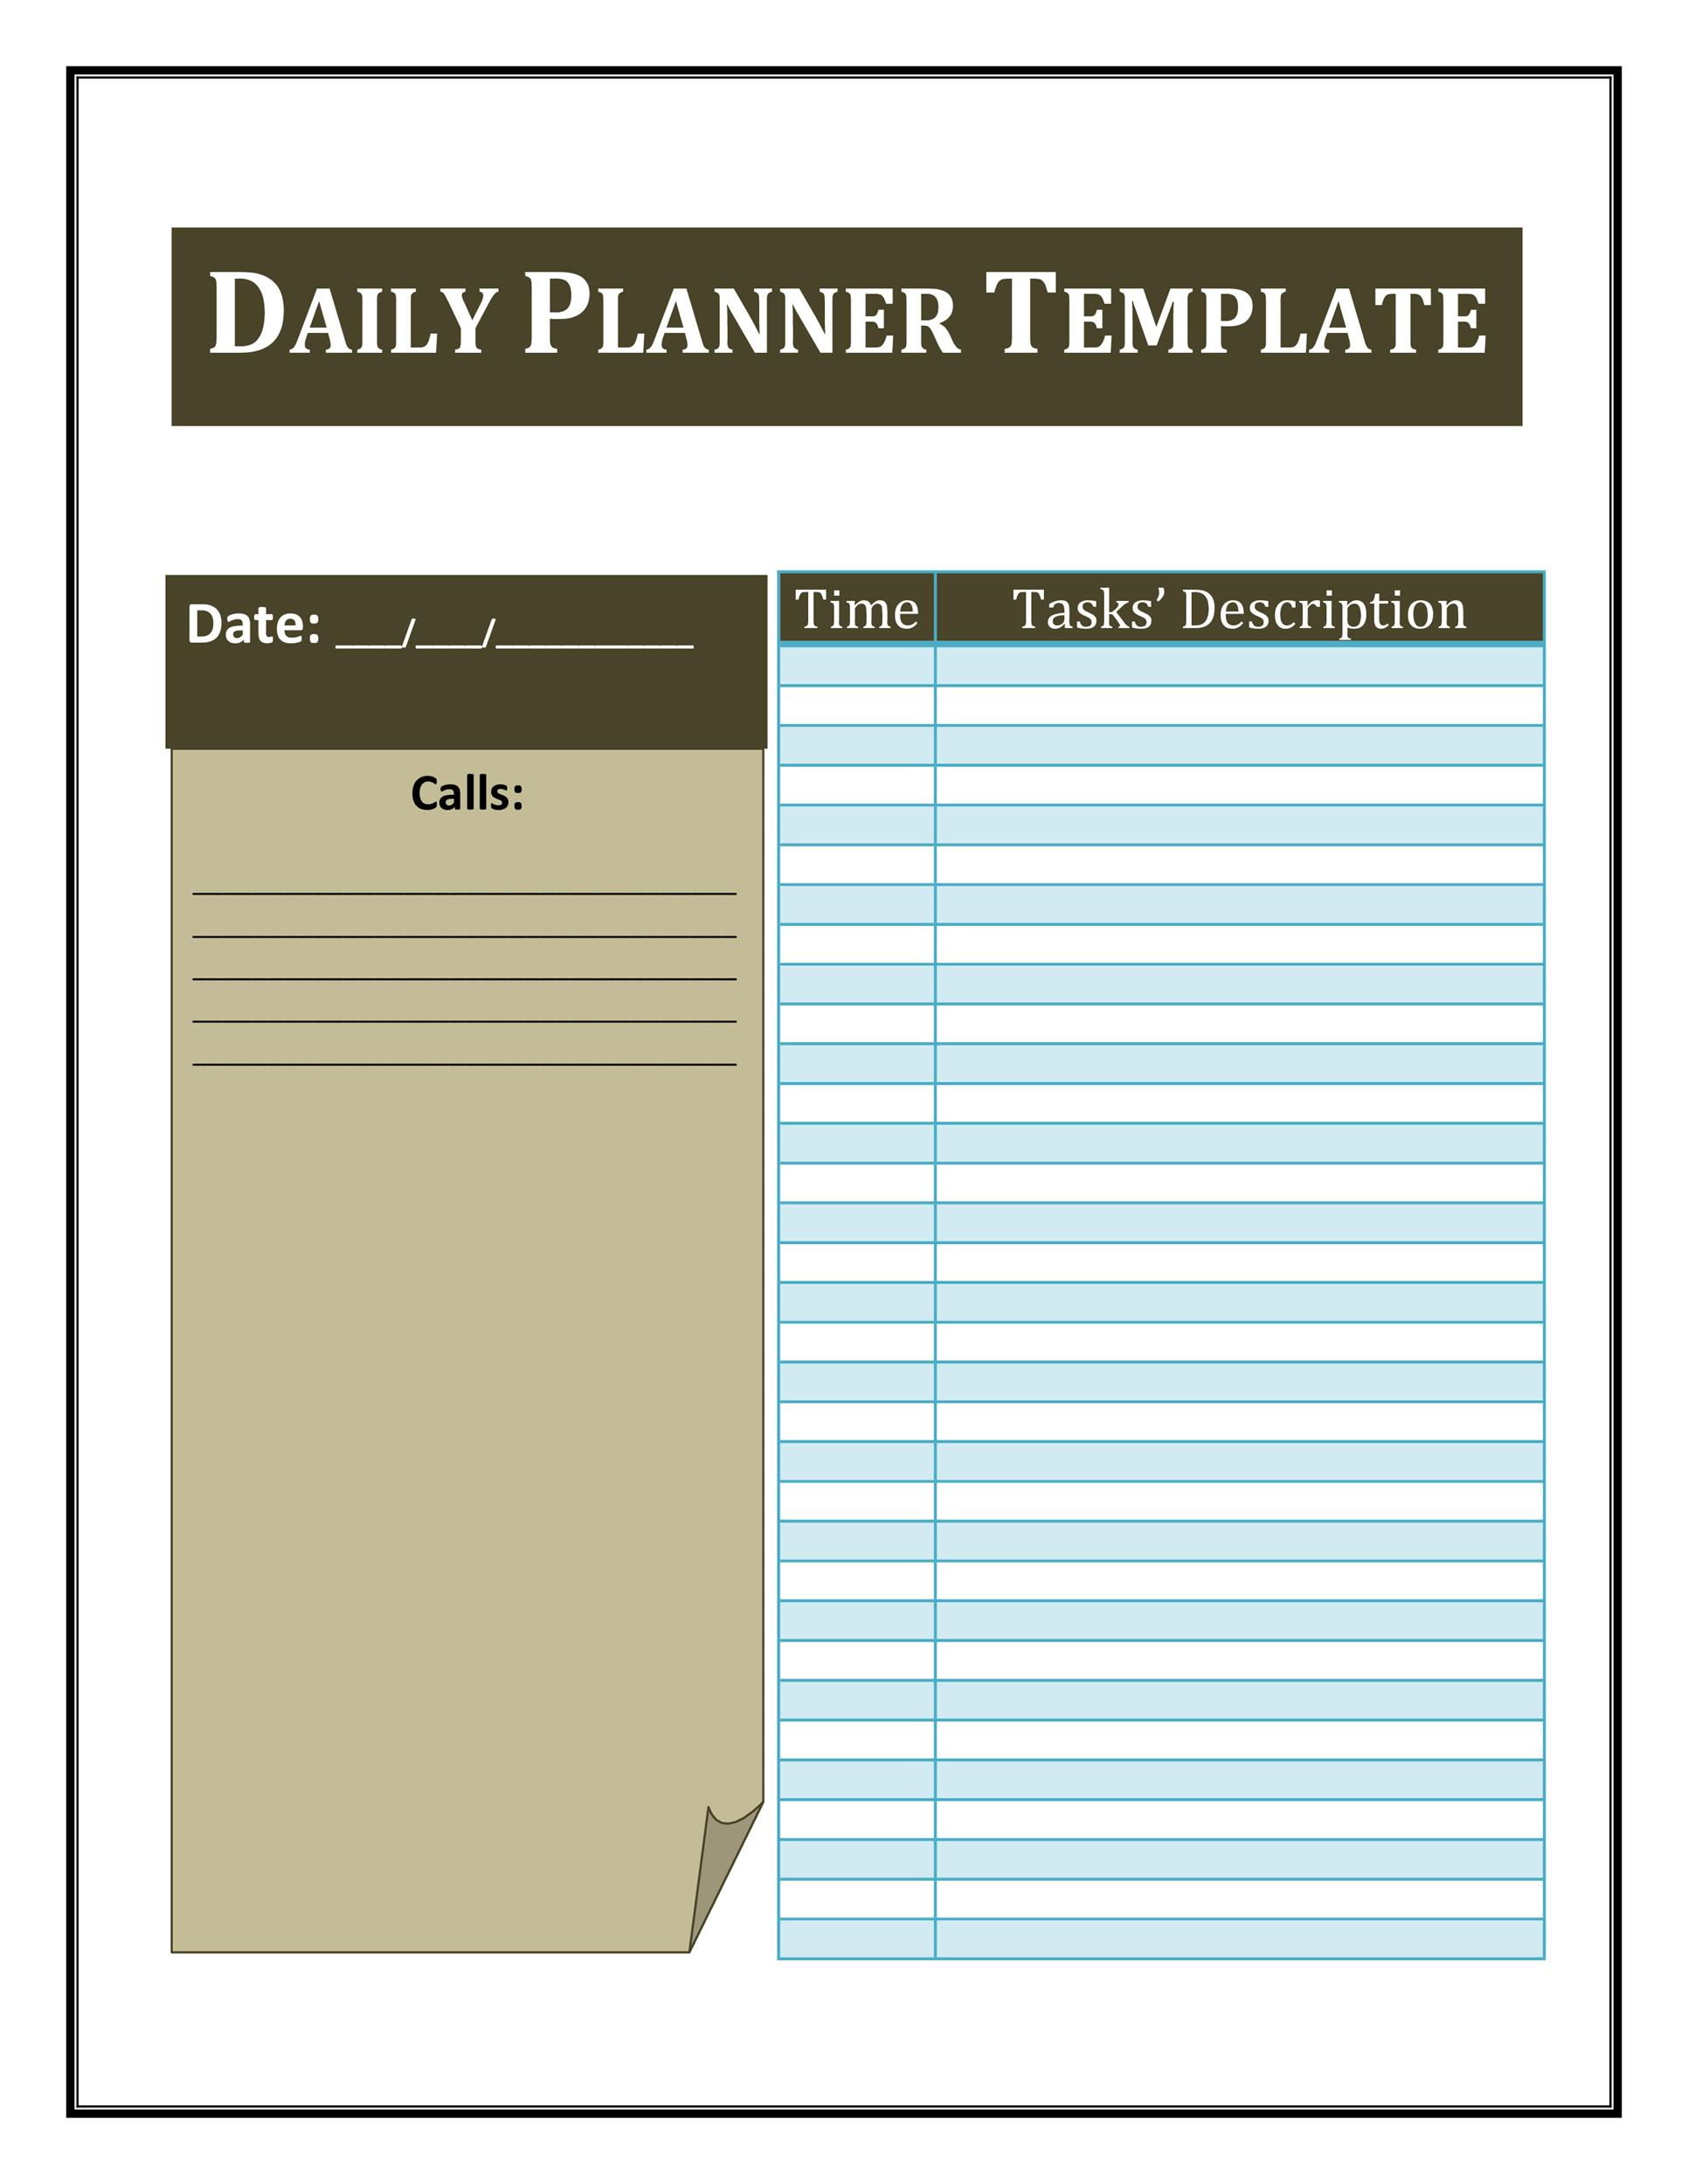 47 Printable Daily Planner Templates (Free In Wordexcelpdf) throughout Free Daily Calendar Template